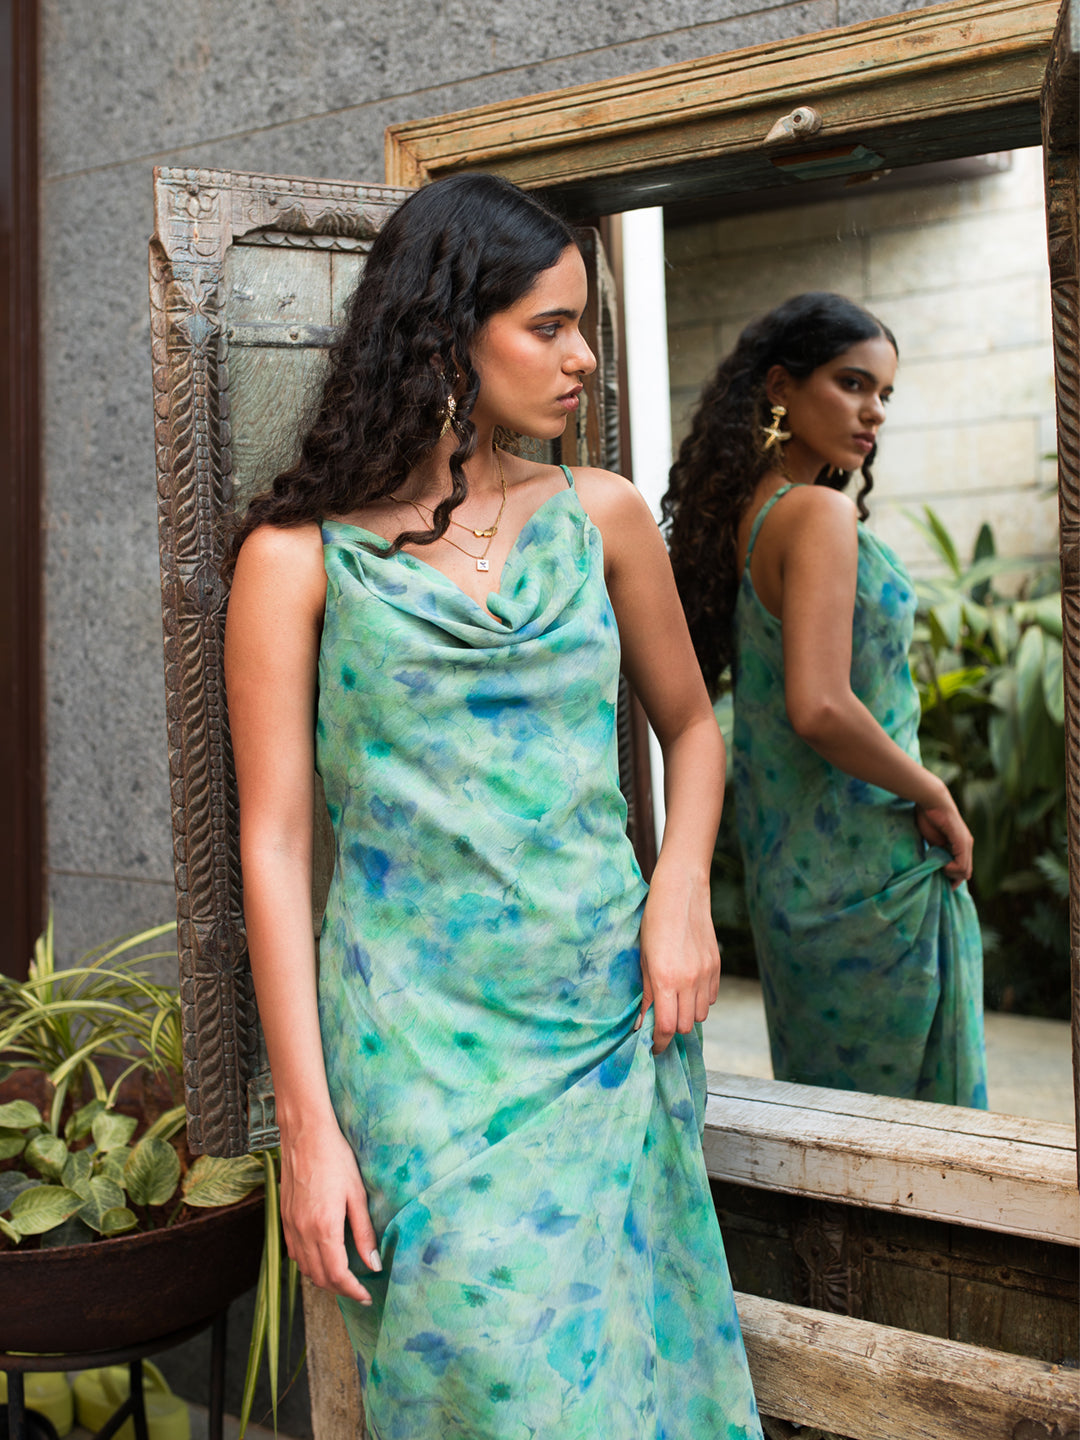 Buy Green Printed Floral Chiffon Fabric | Cowl Neck Slip Dress Online In India